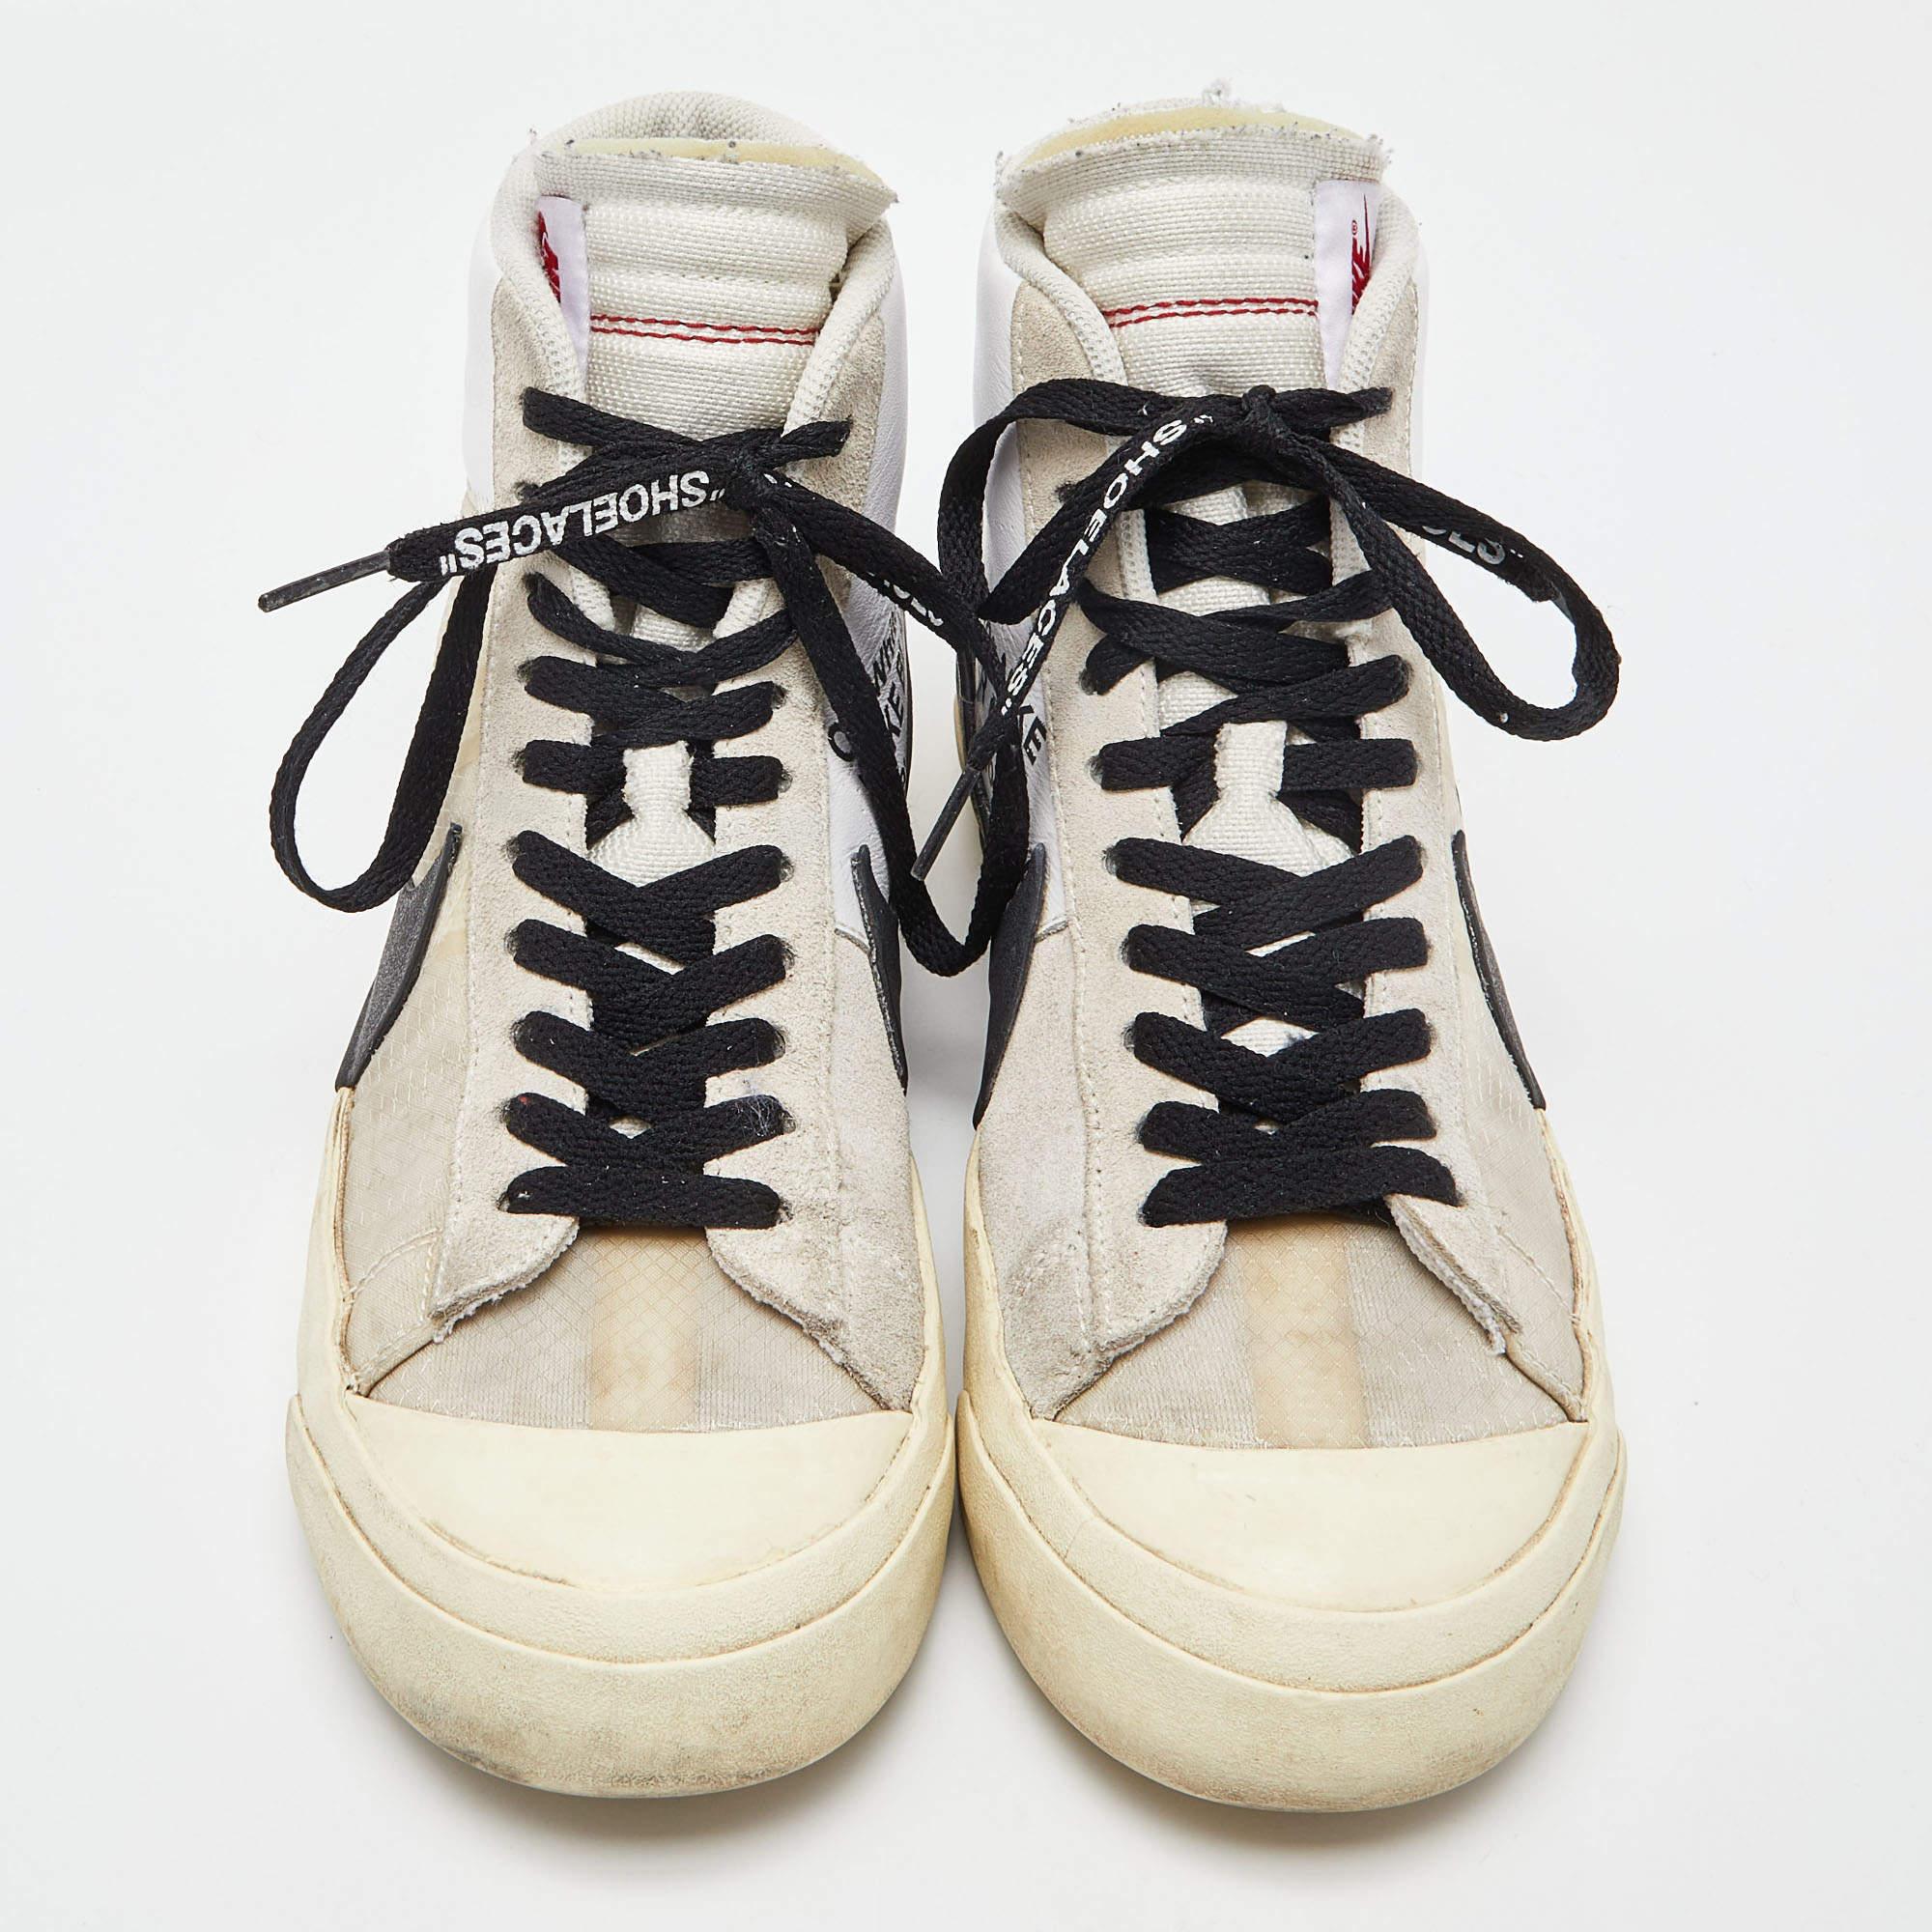 Off-White x Nike Suede, Mesh and Leather Mid Blazer Lace Up Sneakers Size 41 In Fair Condition In Dubai, Al Qouz 2